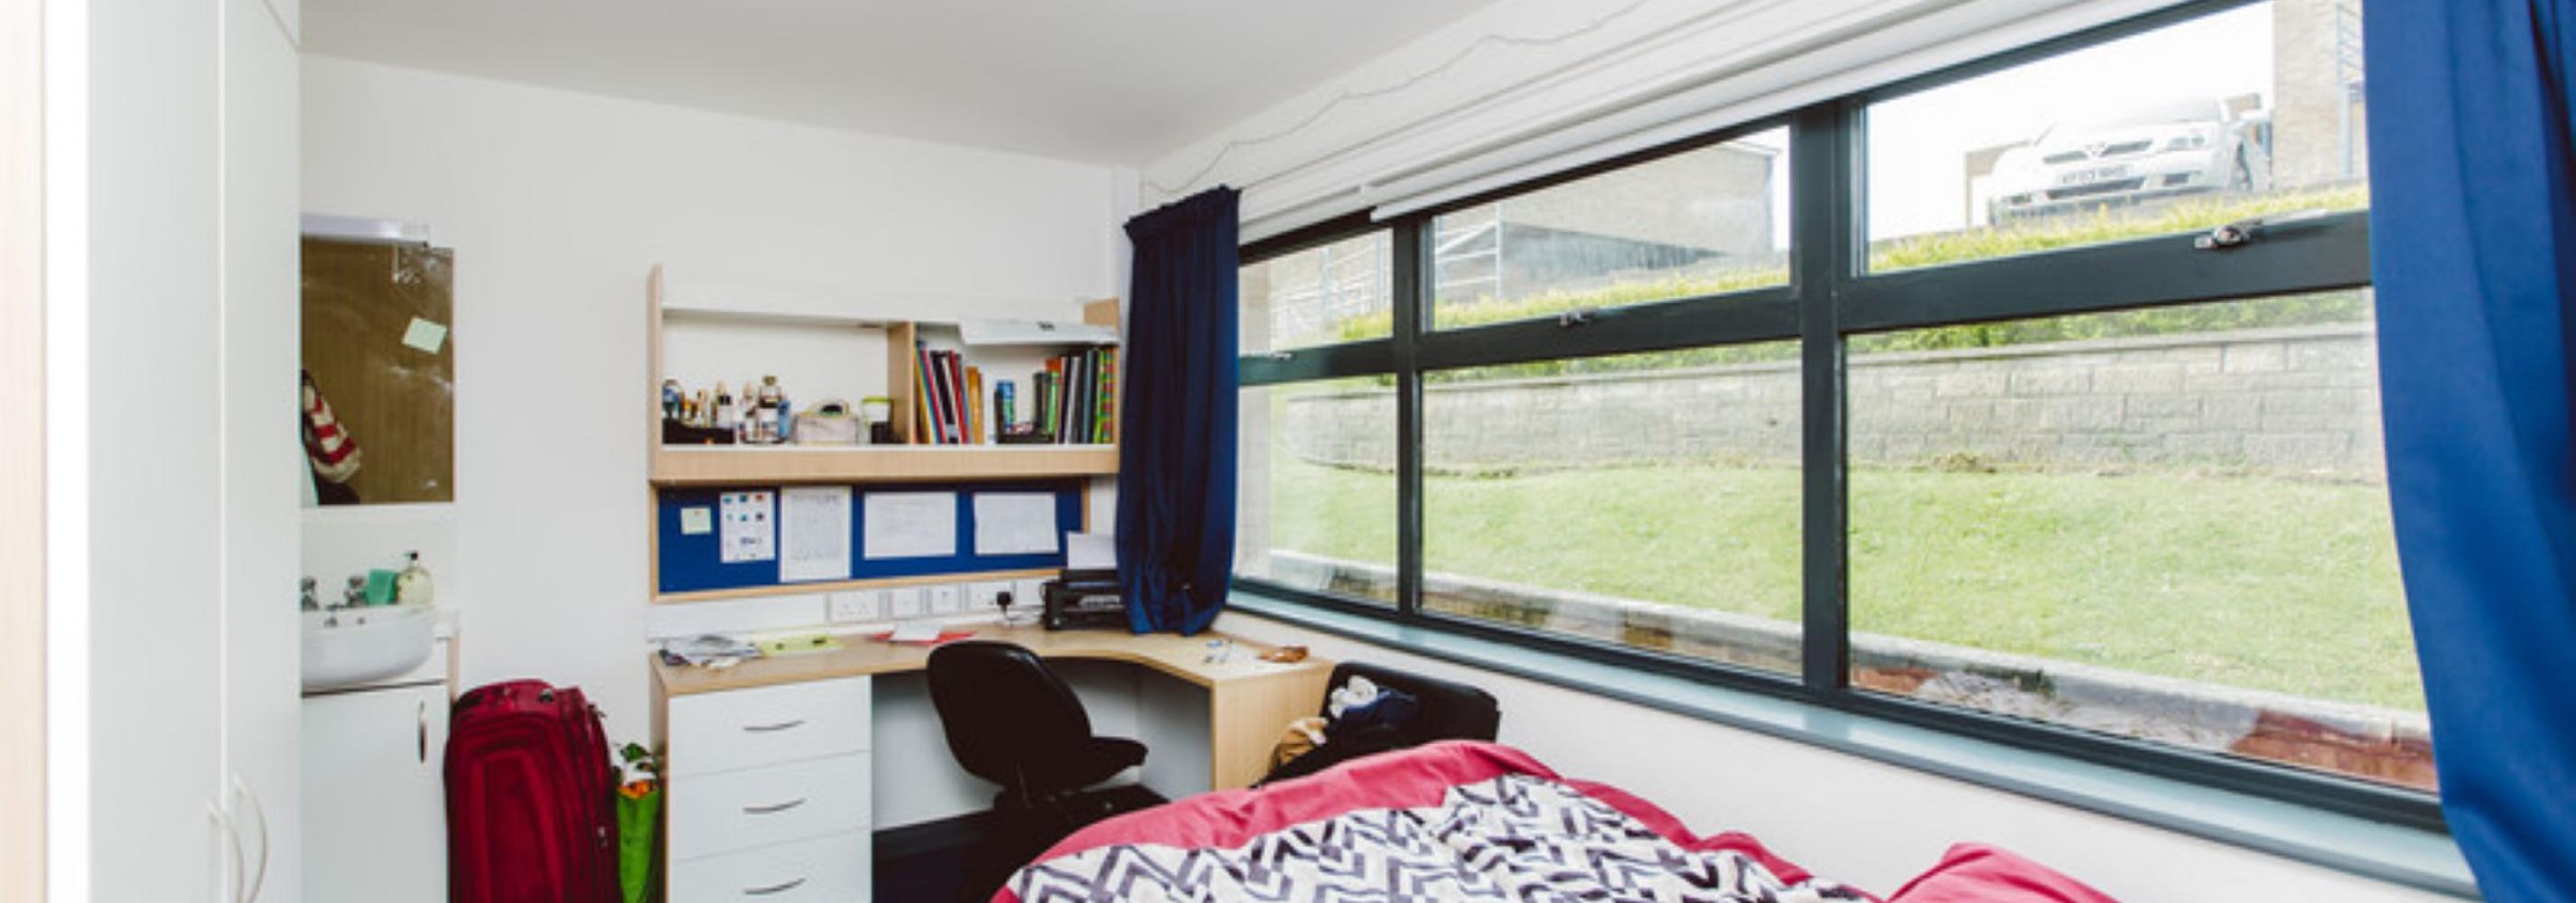 Large room with wide windows and blue curtains. A small double bed next to the window with the desk and shelving directly opposite.